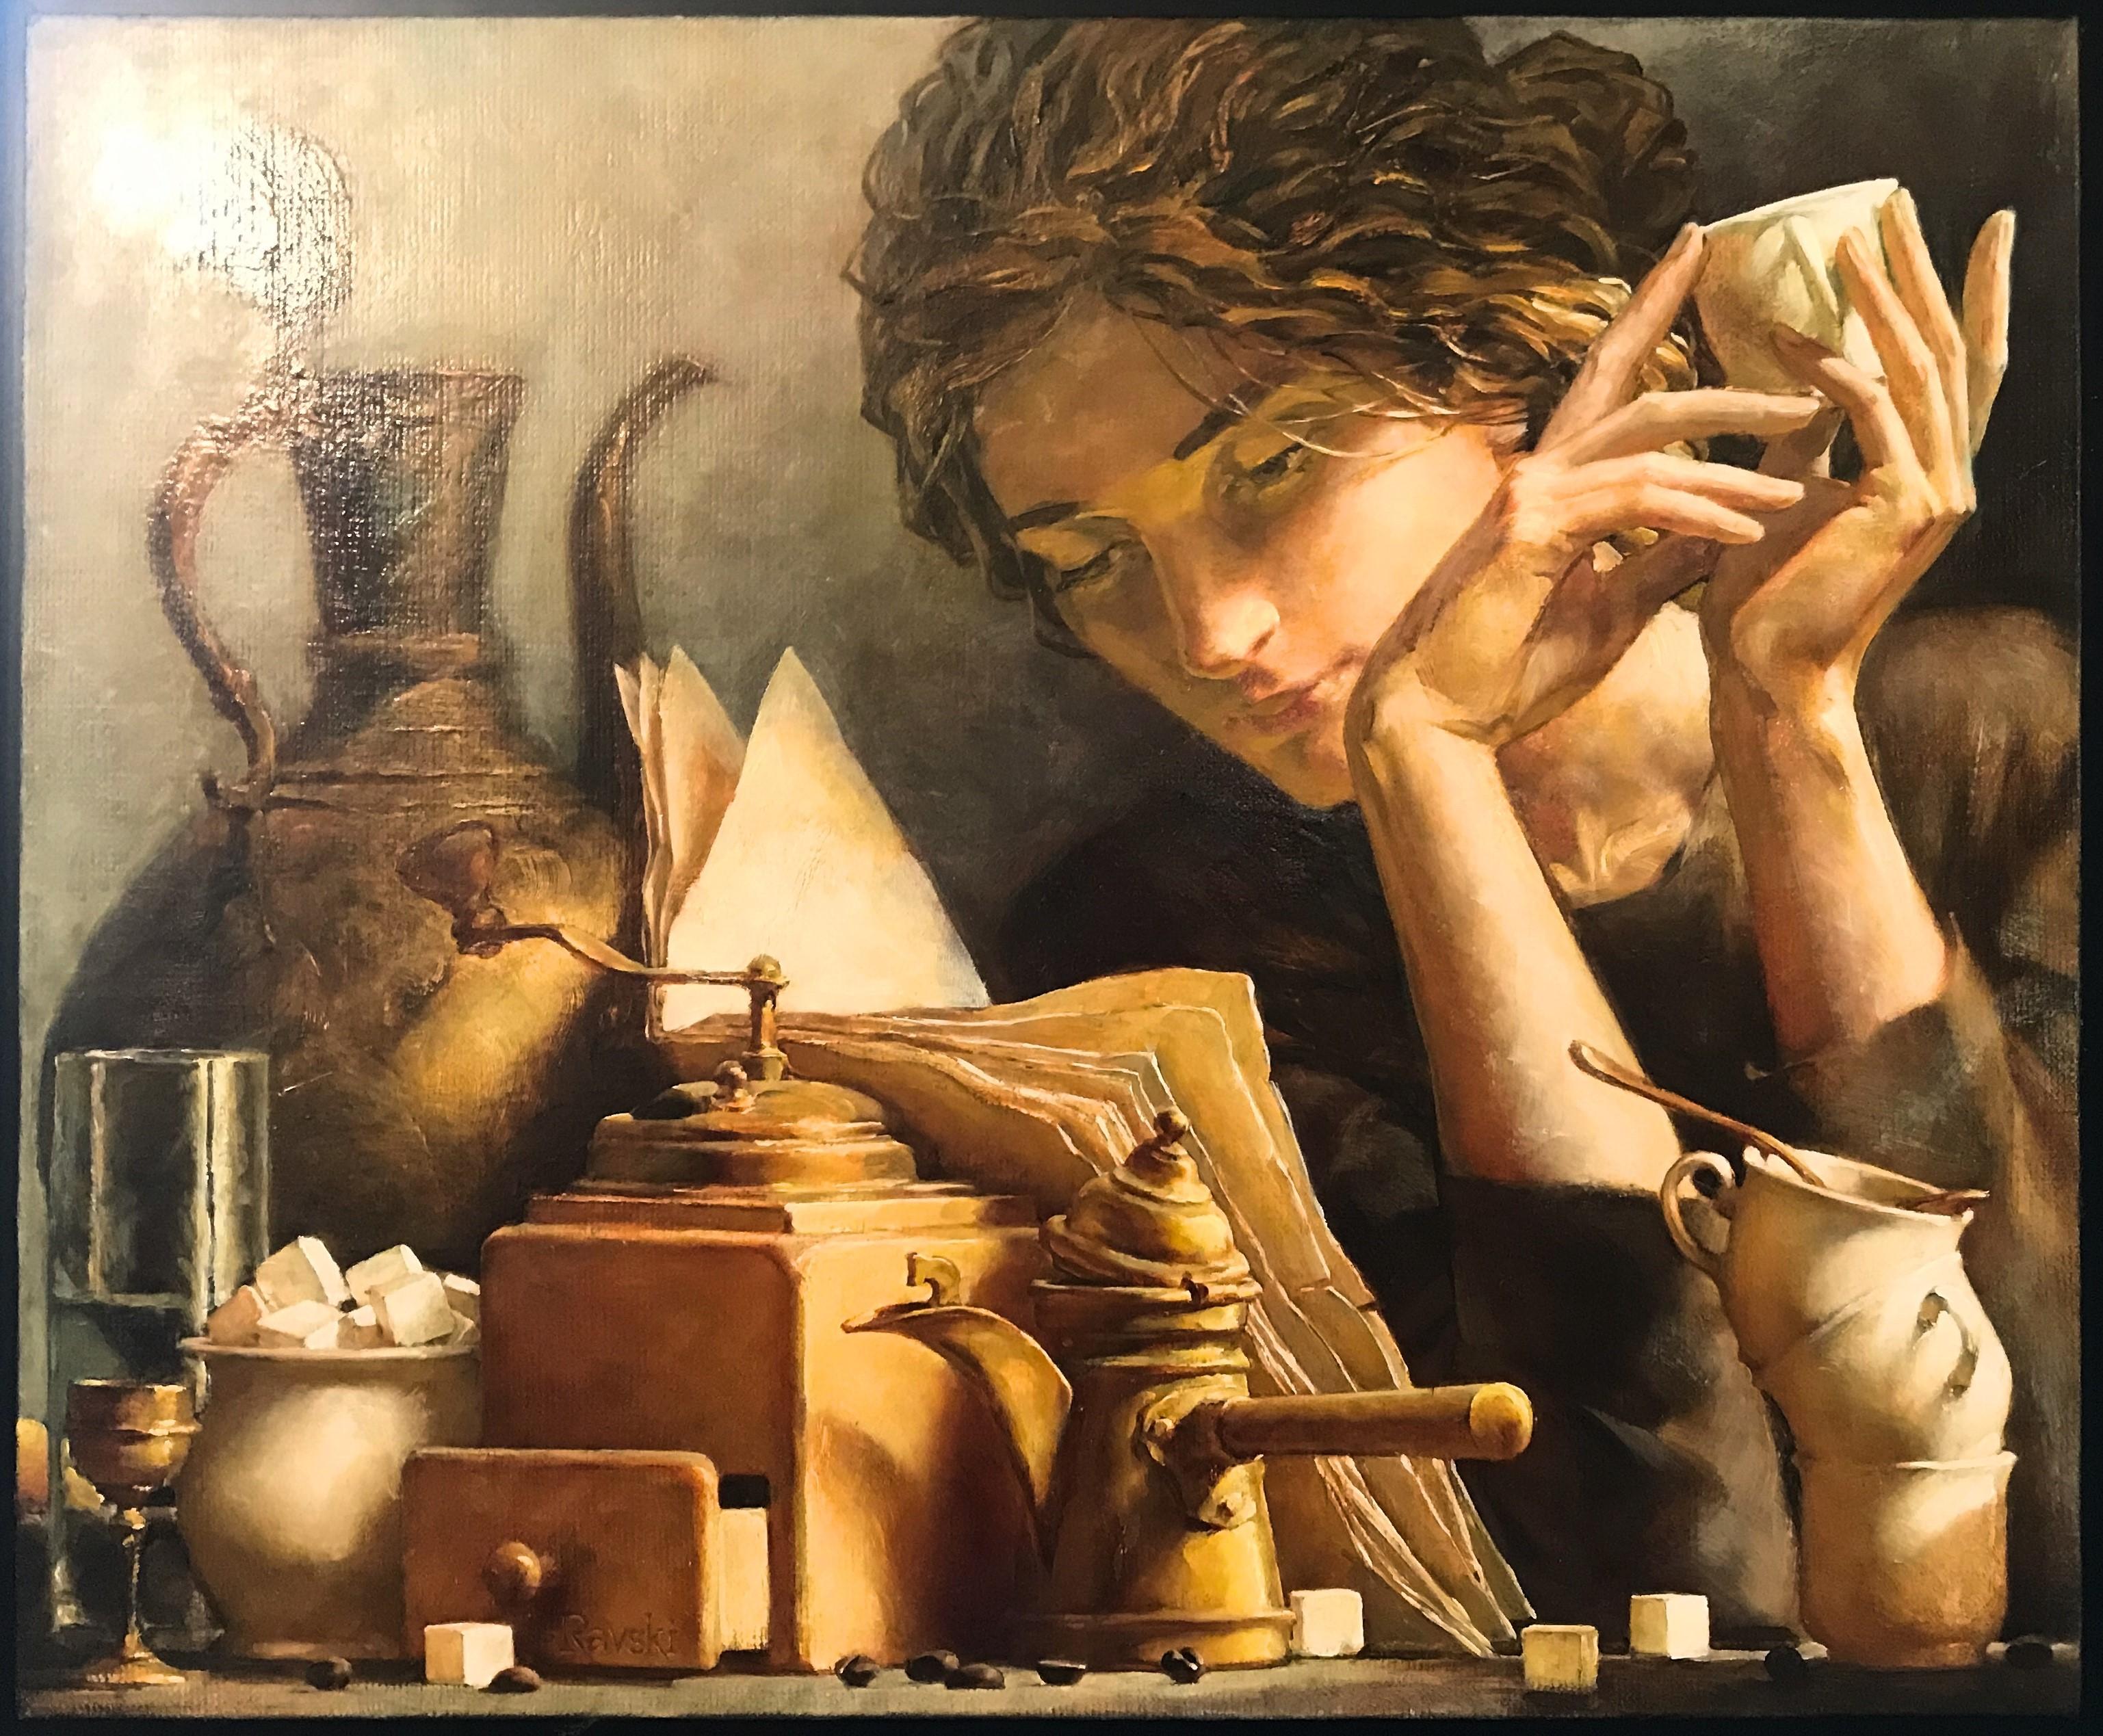  A Cup of Coffee, 2020  - Painting by Alexej RAVSKI